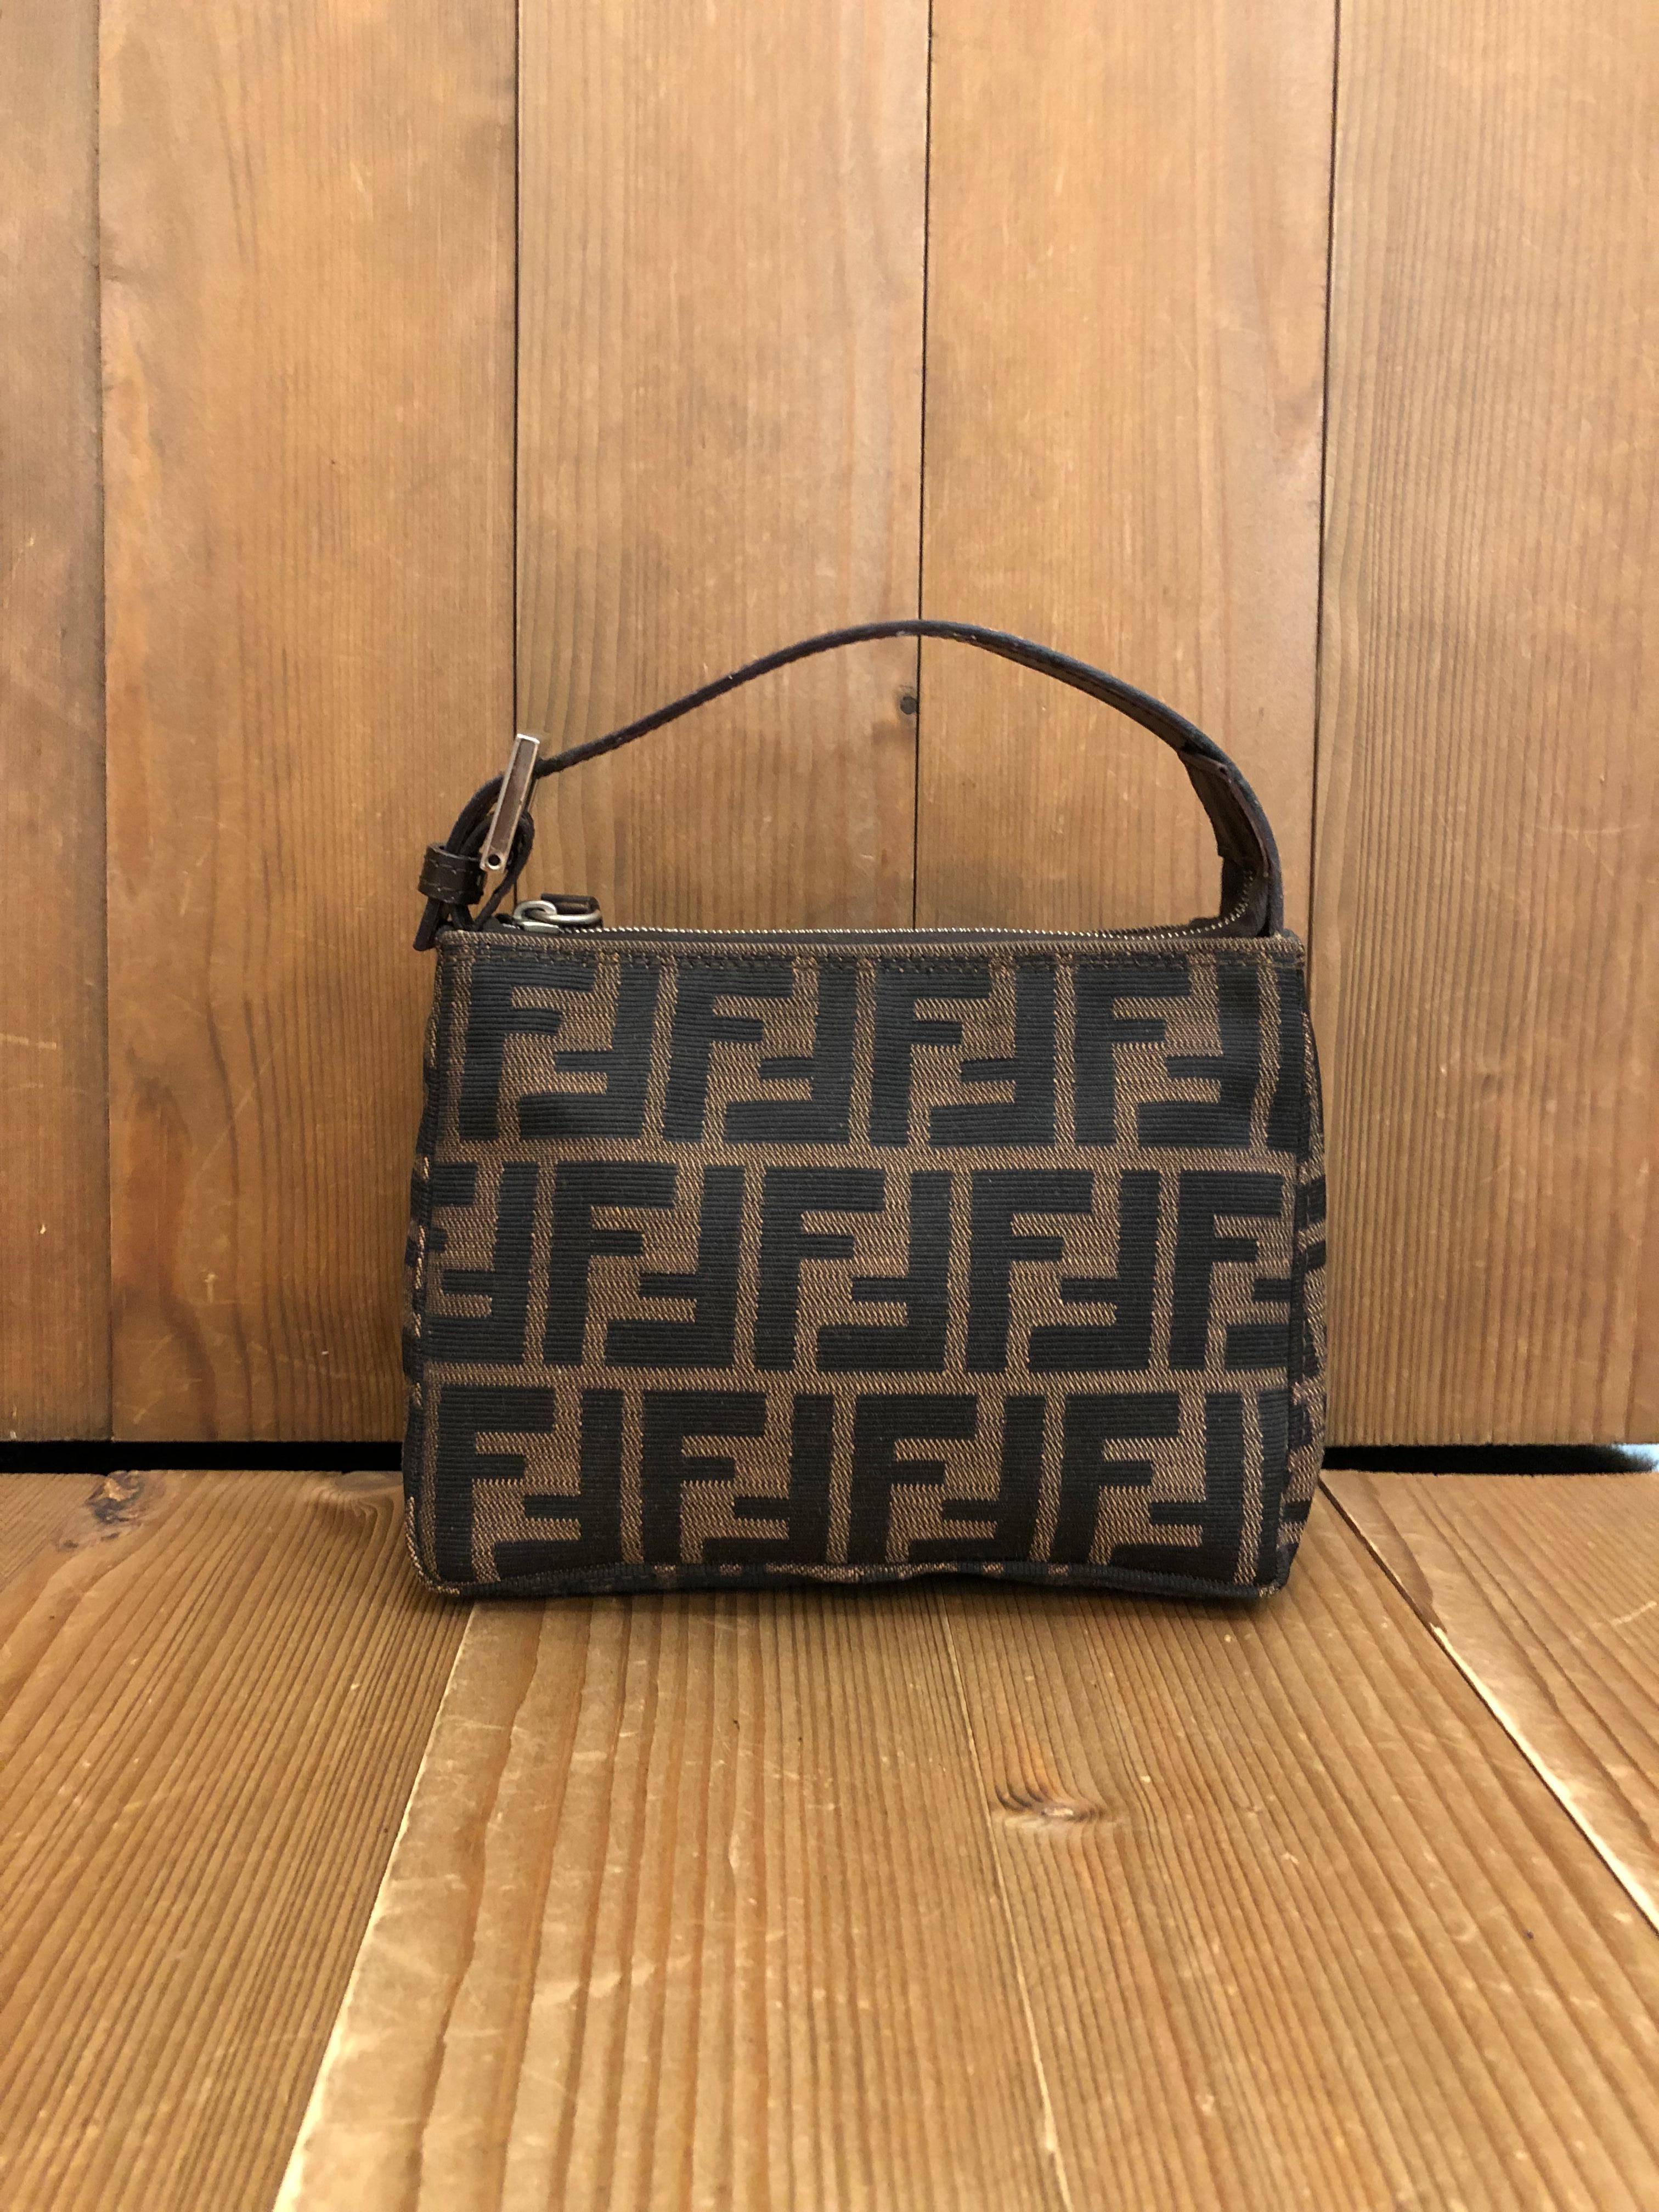 This Vintage FENDI mini pouch handbag is crafted of Fendi's iconi Zucca jacquard in brown/black trimmed with brown leather featuring silver toned hardware. Zipper top closure opens to a new beige interior. Made in Italy. Measures 7 x 5 x 3